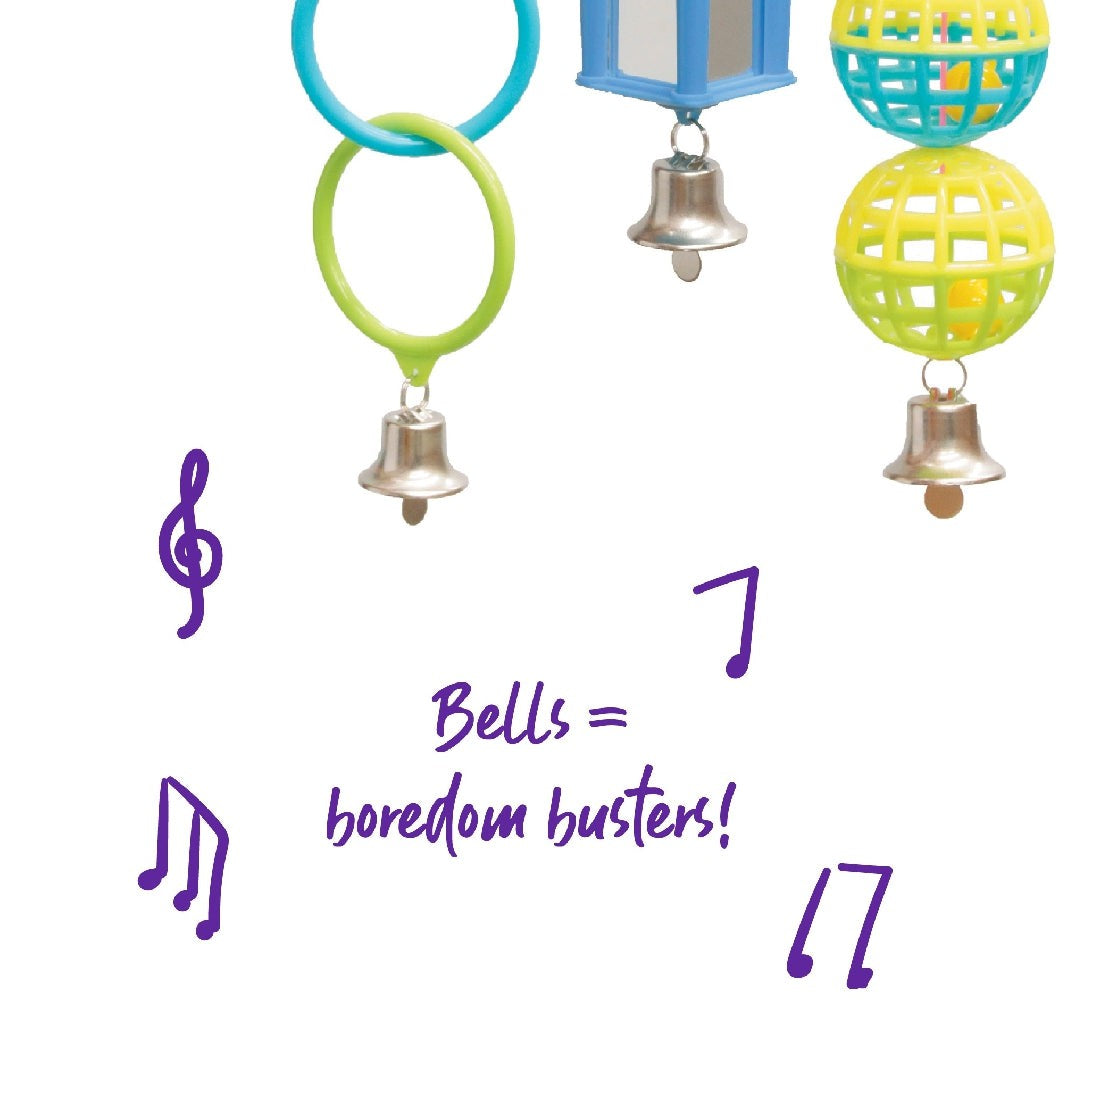 Colorful bird toys with bells and text "Bells = boredom busters!"